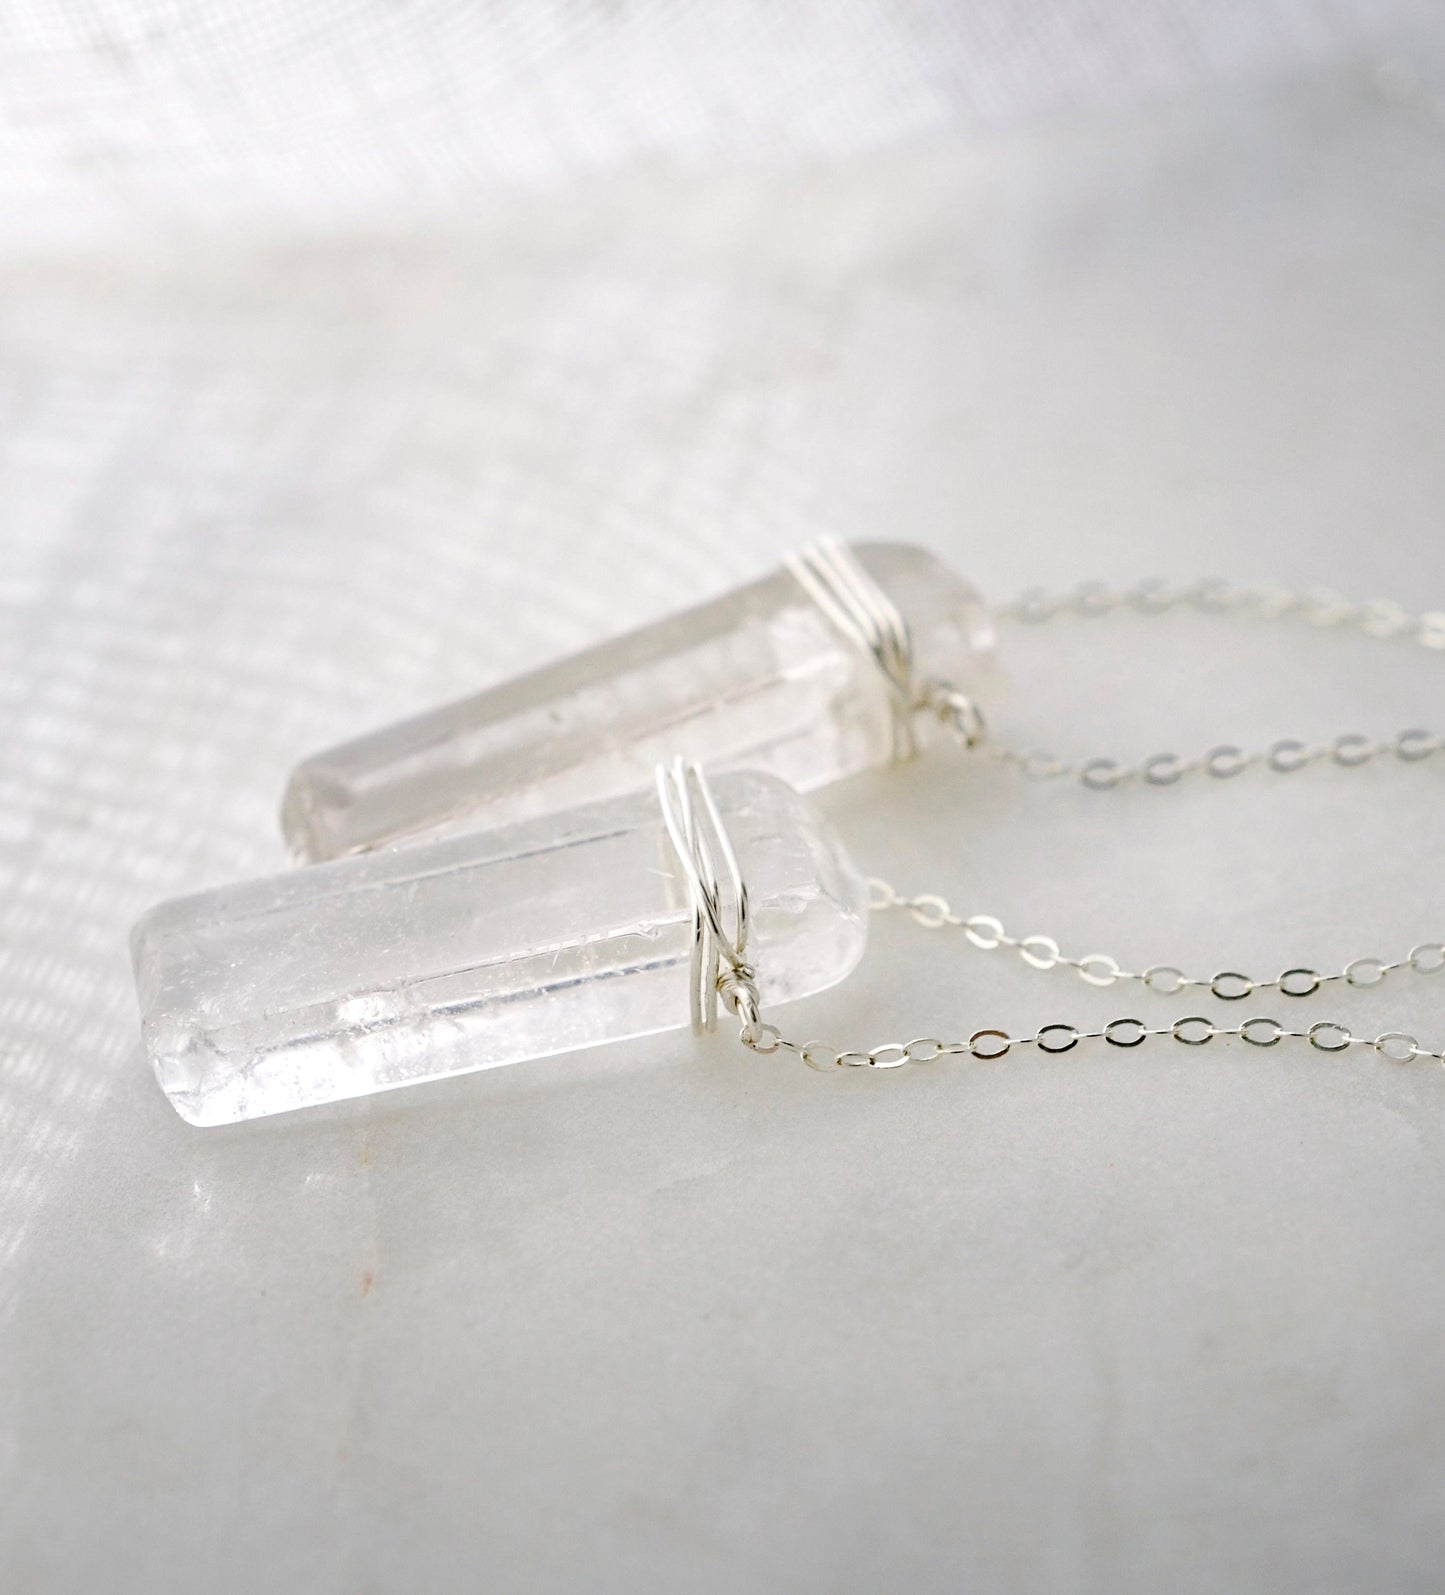 Crystal Quartz Rectangle Pendant in Sterling Silver or Gold Filled